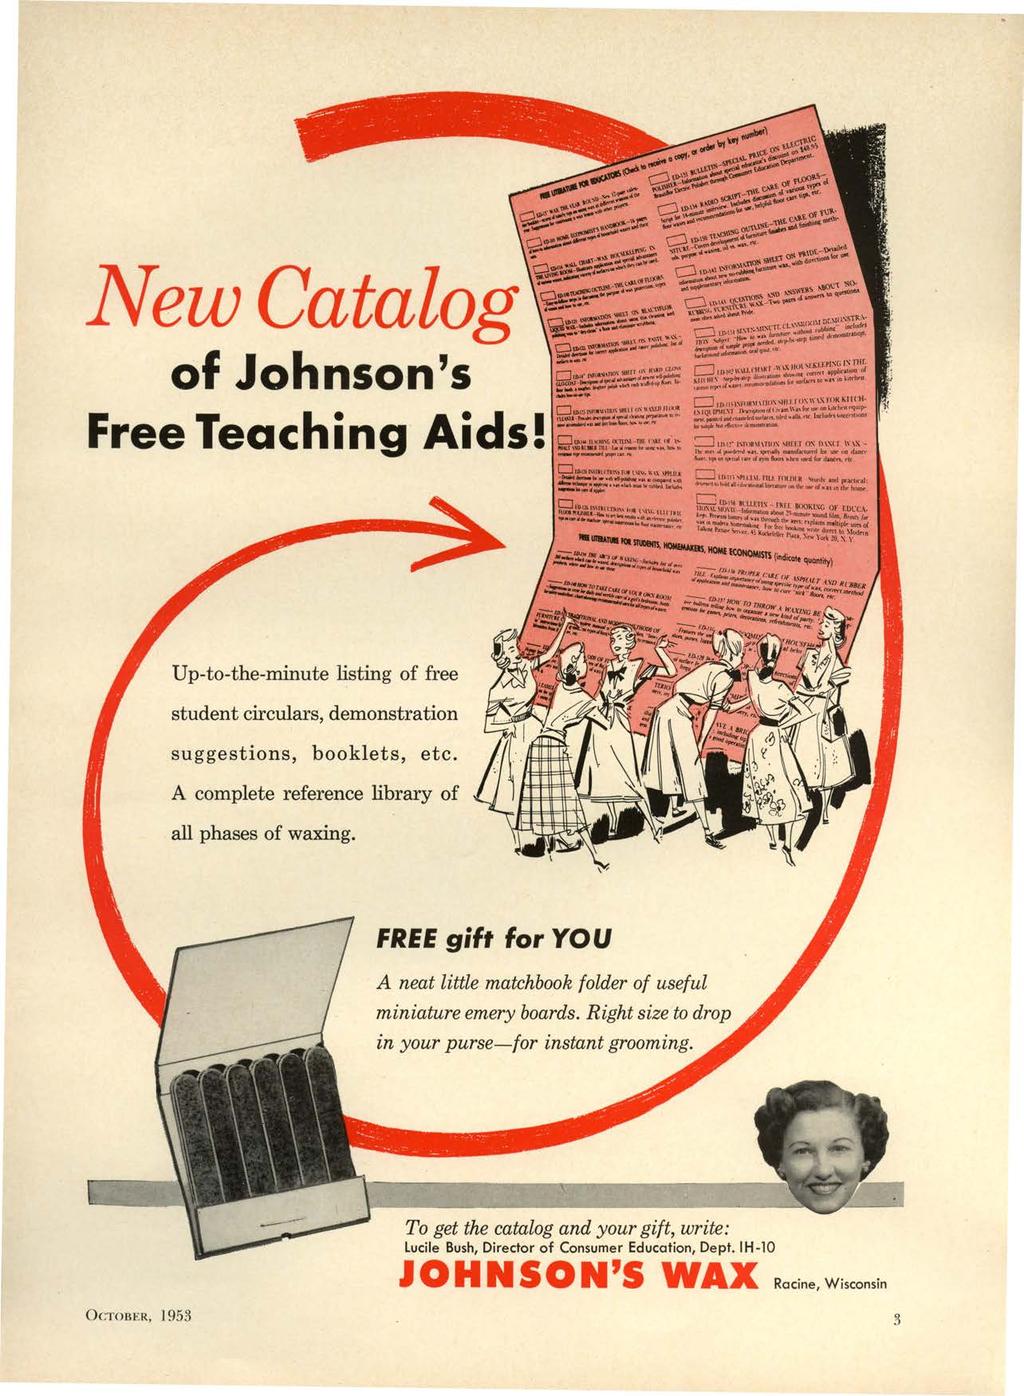 New Catalog of Johnson's Free Teaching Aids! Up-to-the-minute listing of free student circulars, demonstration suggestions, booklets, etc. A complete reference library of all phases of waxing.